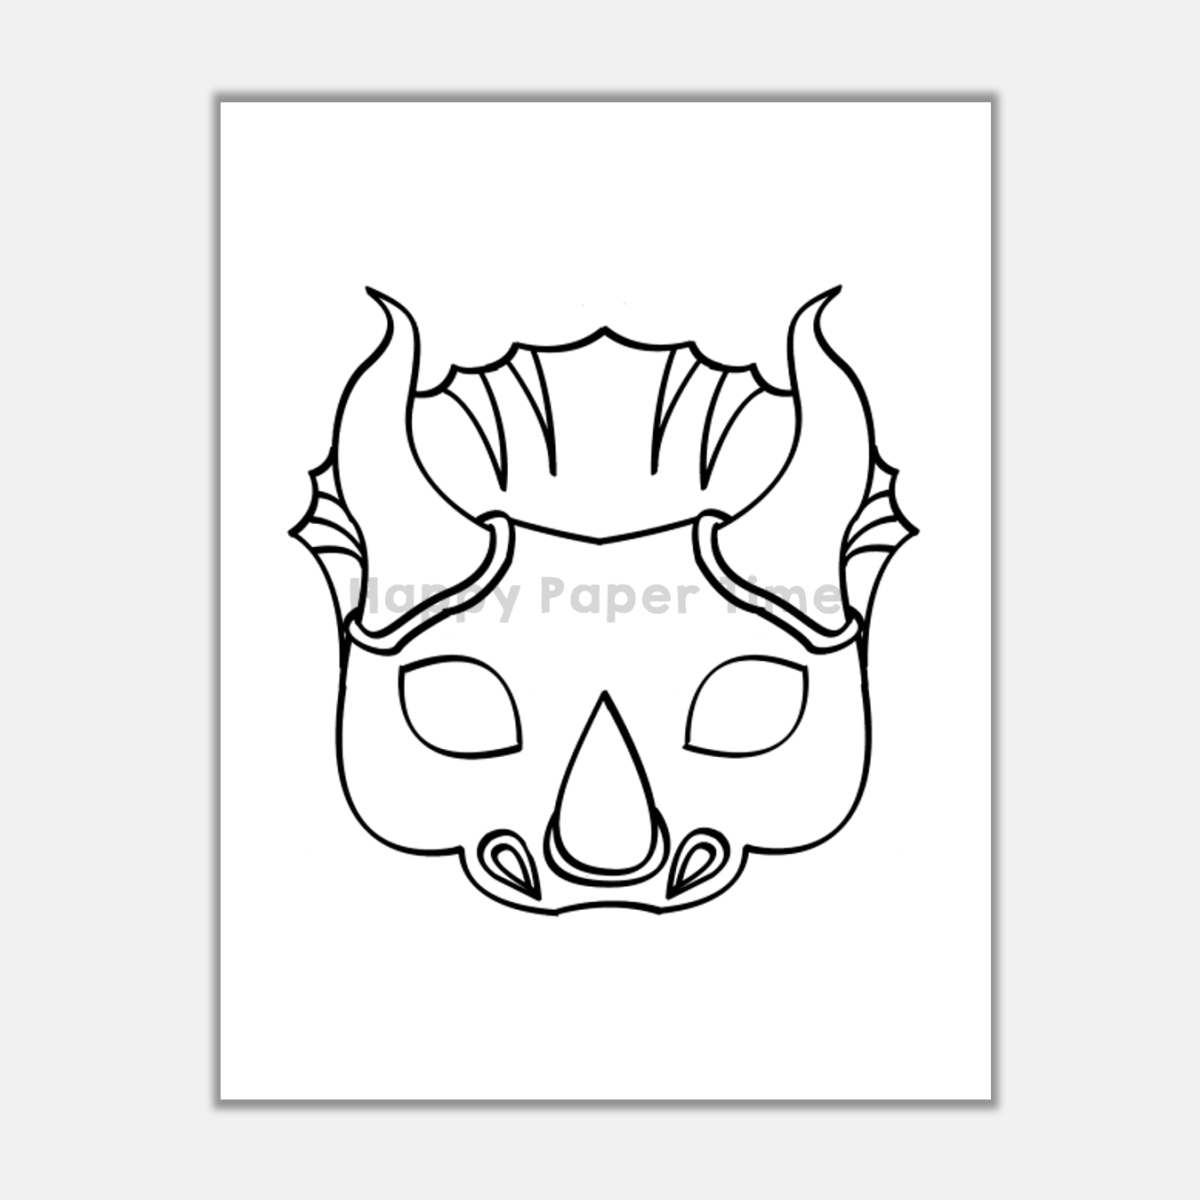 Triceratops paper mask printable dinosaur coloring craft activity costume made by teachers